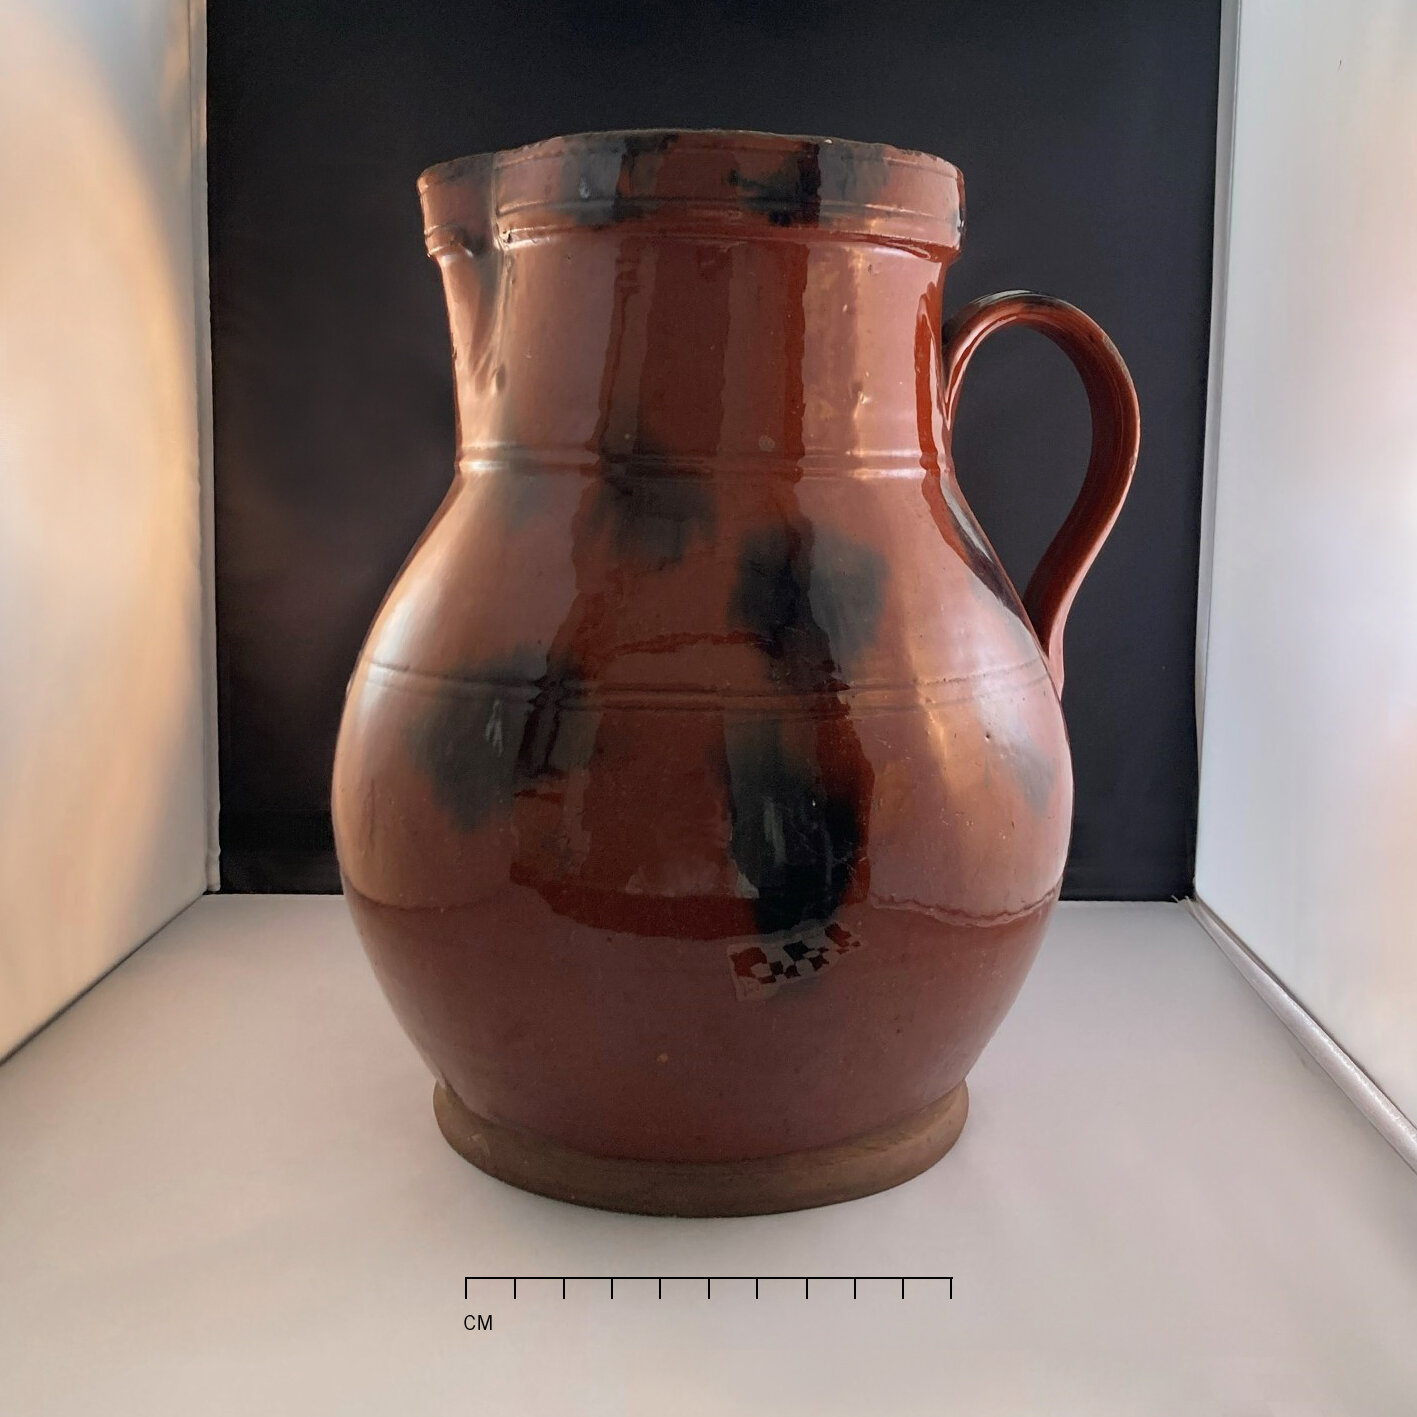   Redware pitcher from Preservation Long Island’s local redwares collection.  Photographed by Allison McGovern 